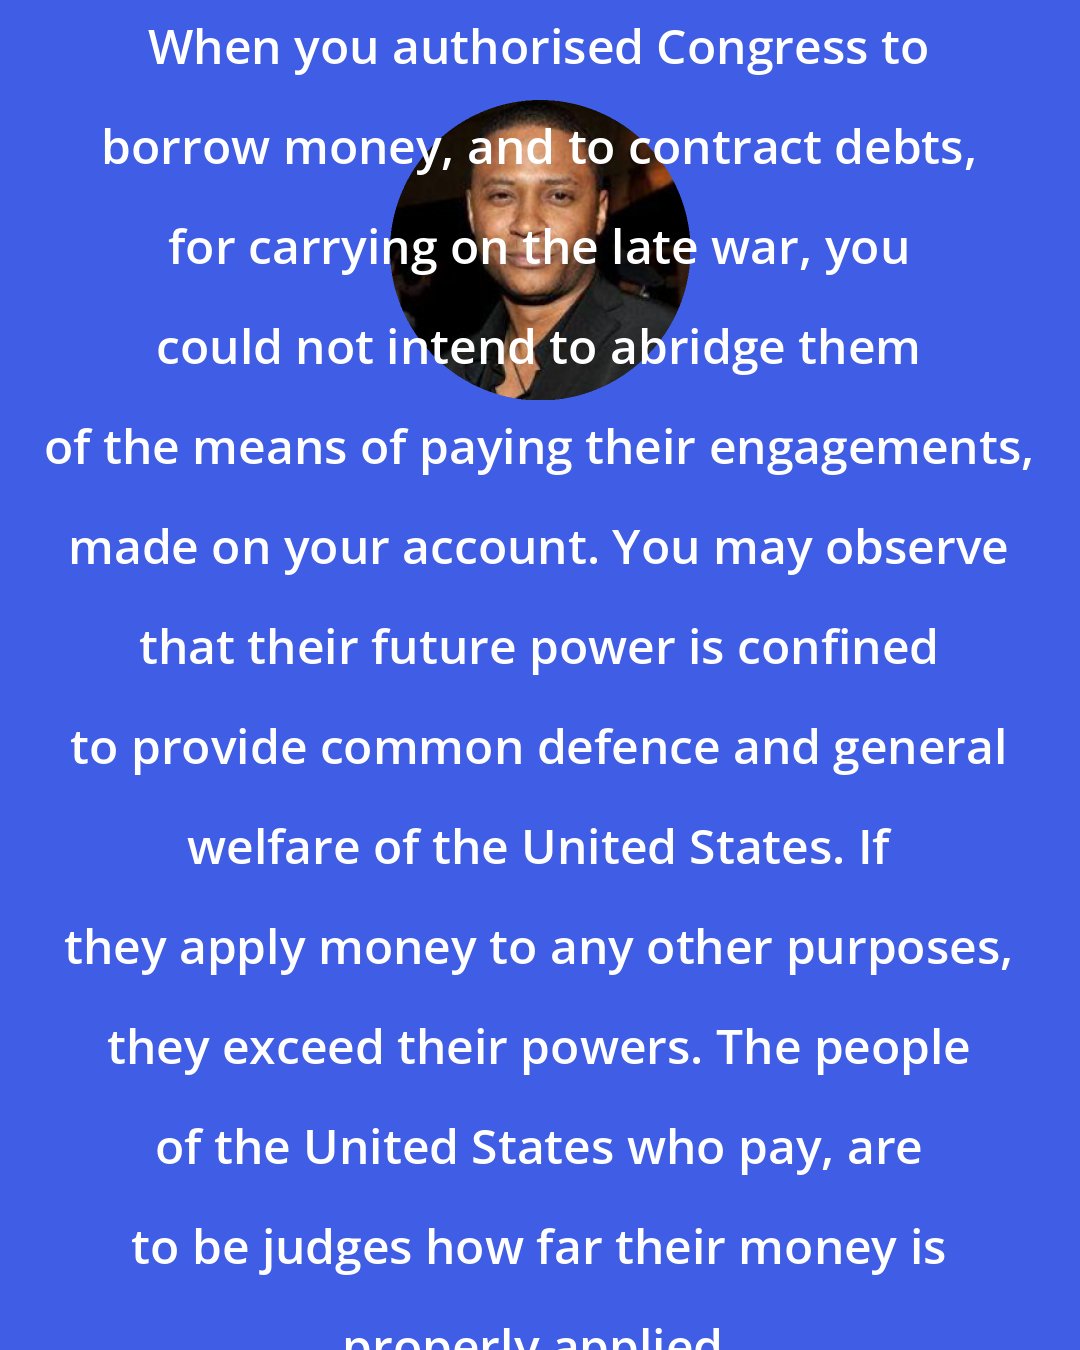 David Ramsey: When you authorised Congress to borrow money, and to contract debts, for carrying on the late war, you could not intend to abridge them of the means of paying their engagements, made on your account. You may observe that their future power is confined to provide common defence and general welfare of the United States. If they apply money to any other purposes, they exceed their powers. The people of the United States who pay, are to be judges how far their money is properly applied.